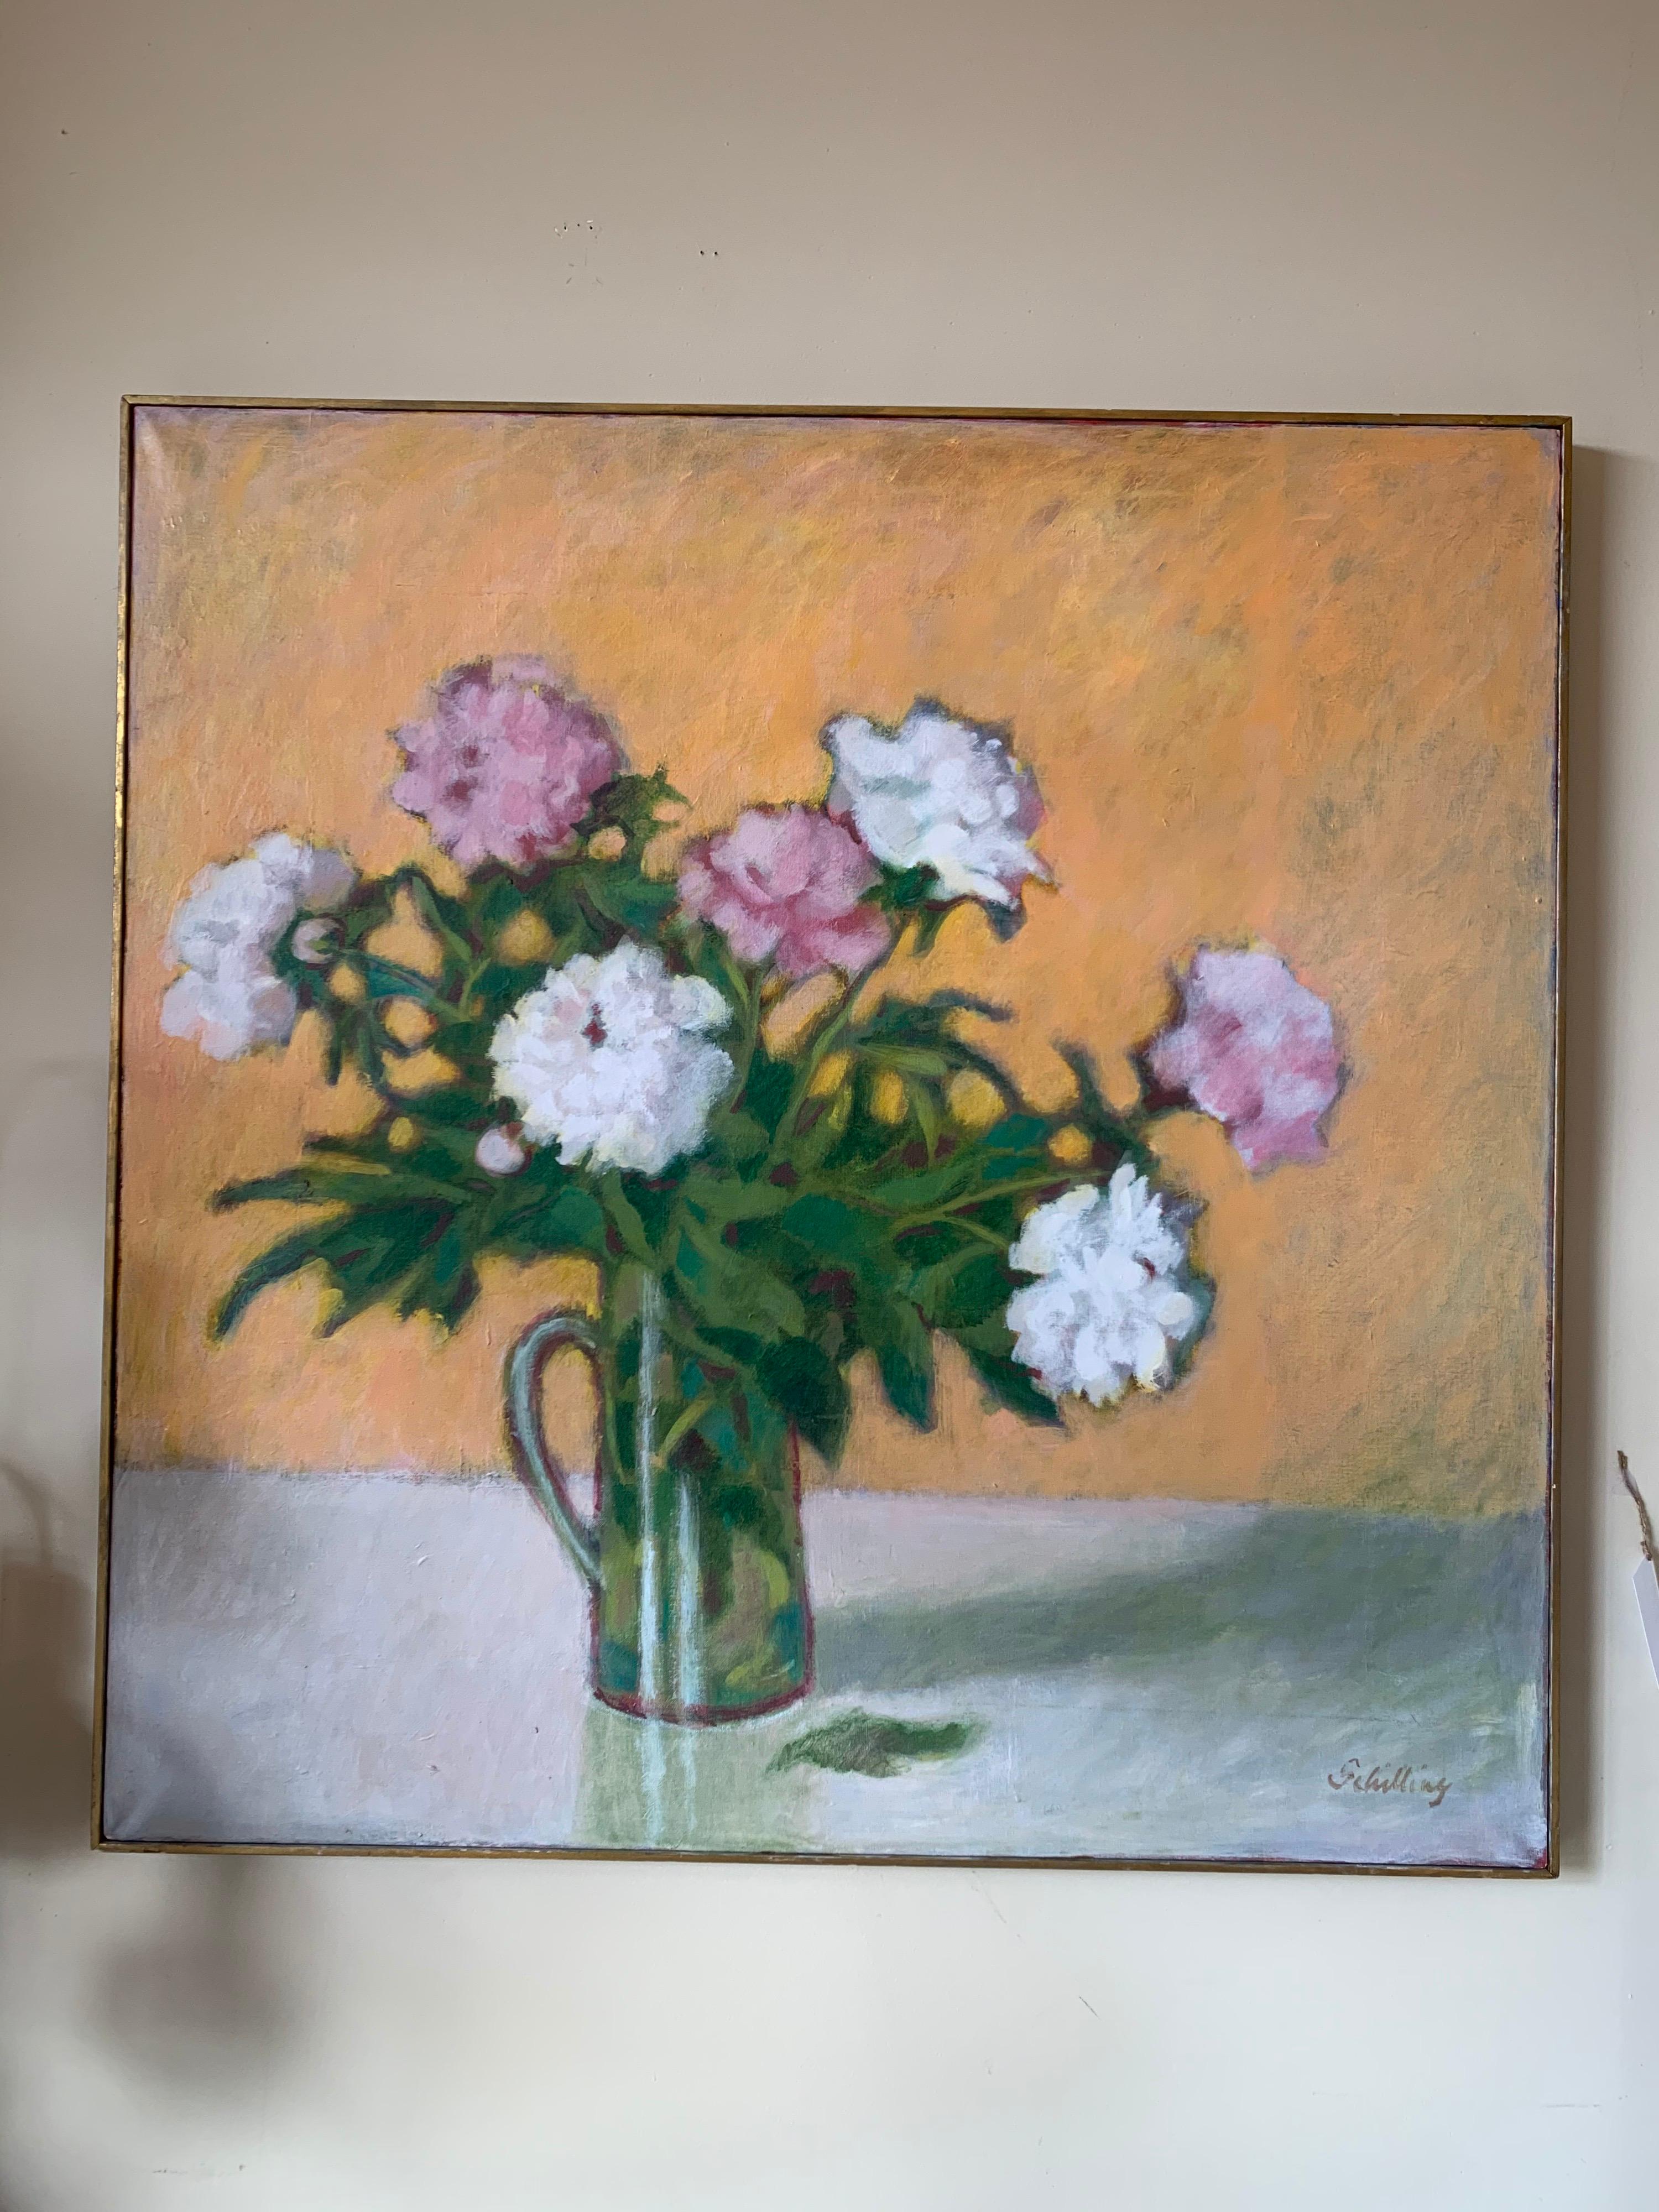 Elegant original artist-signed oil on board still life painting by the artist Schilling.
Now, more than ever, home is where the heart is.